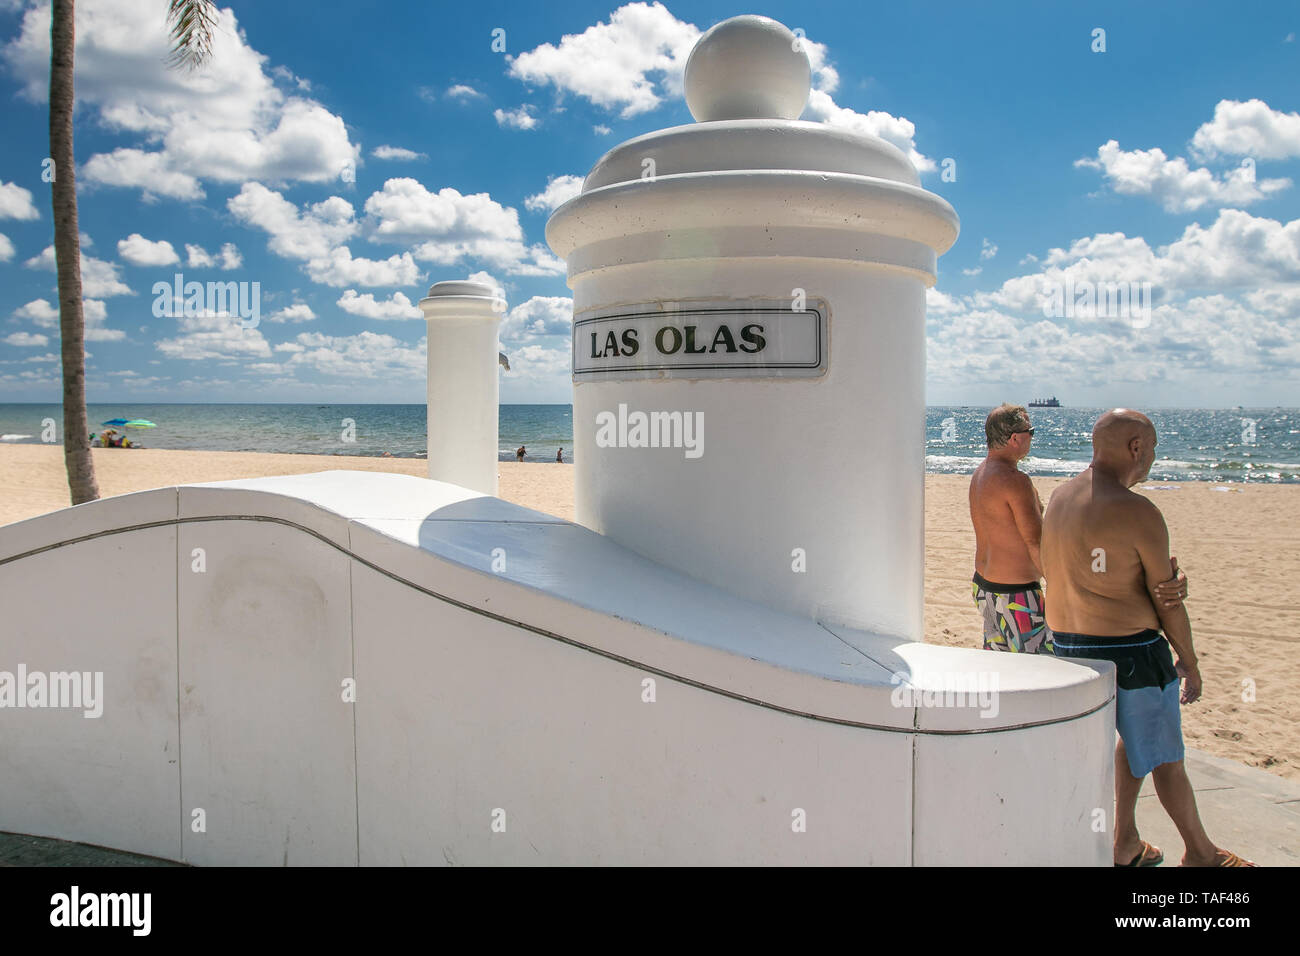 Fort Lauderdale, FL, 5/15/2019: Two men are conversing while standing on the beach across Las Olas Boulevard. Stock Photo